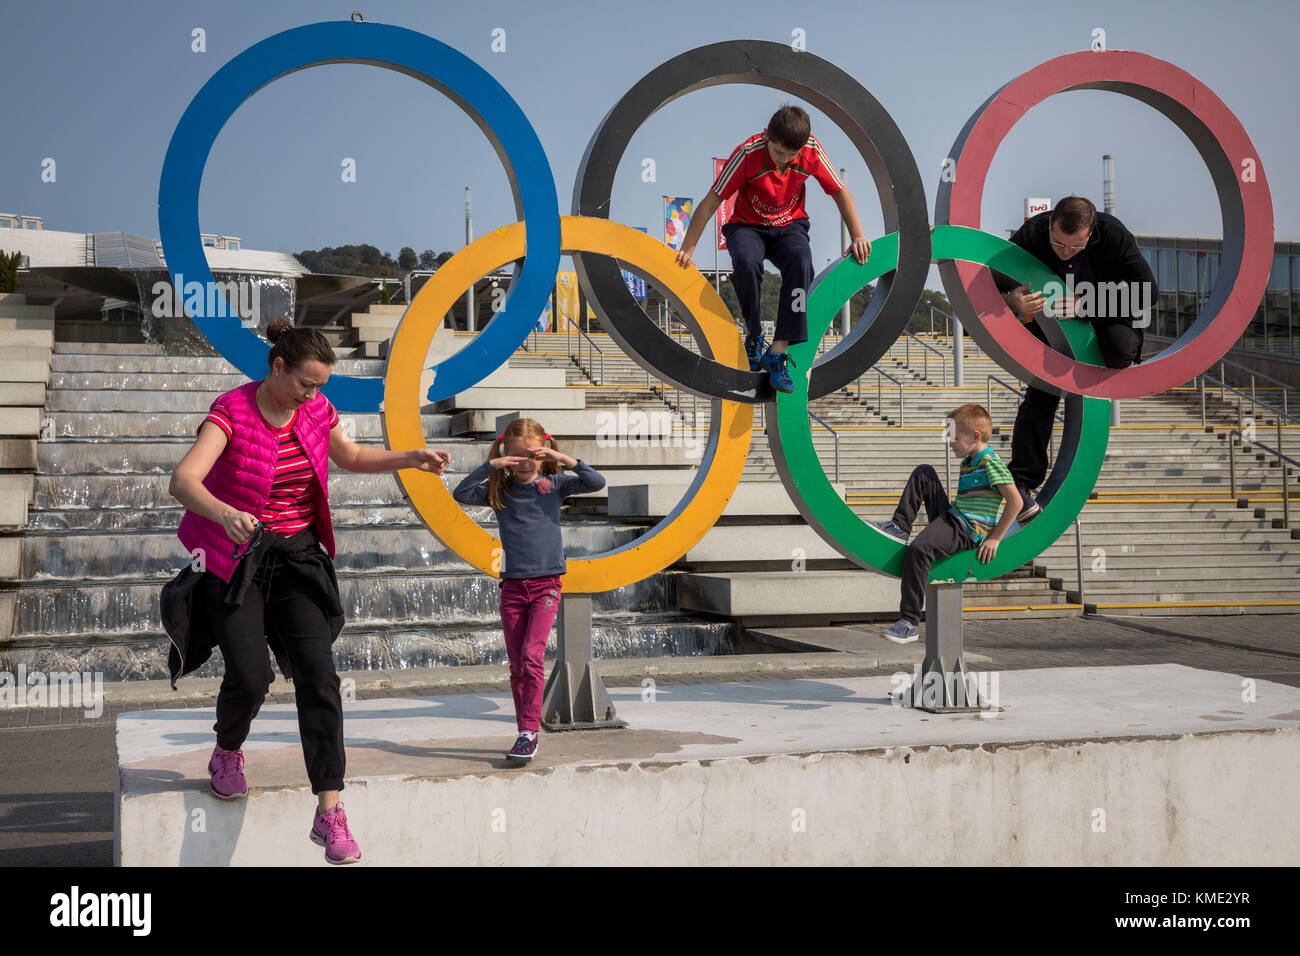 Parents and children get off the Olympic rings after taking photographs, in the Olympic Park in Sochi, Russia Stock Photo